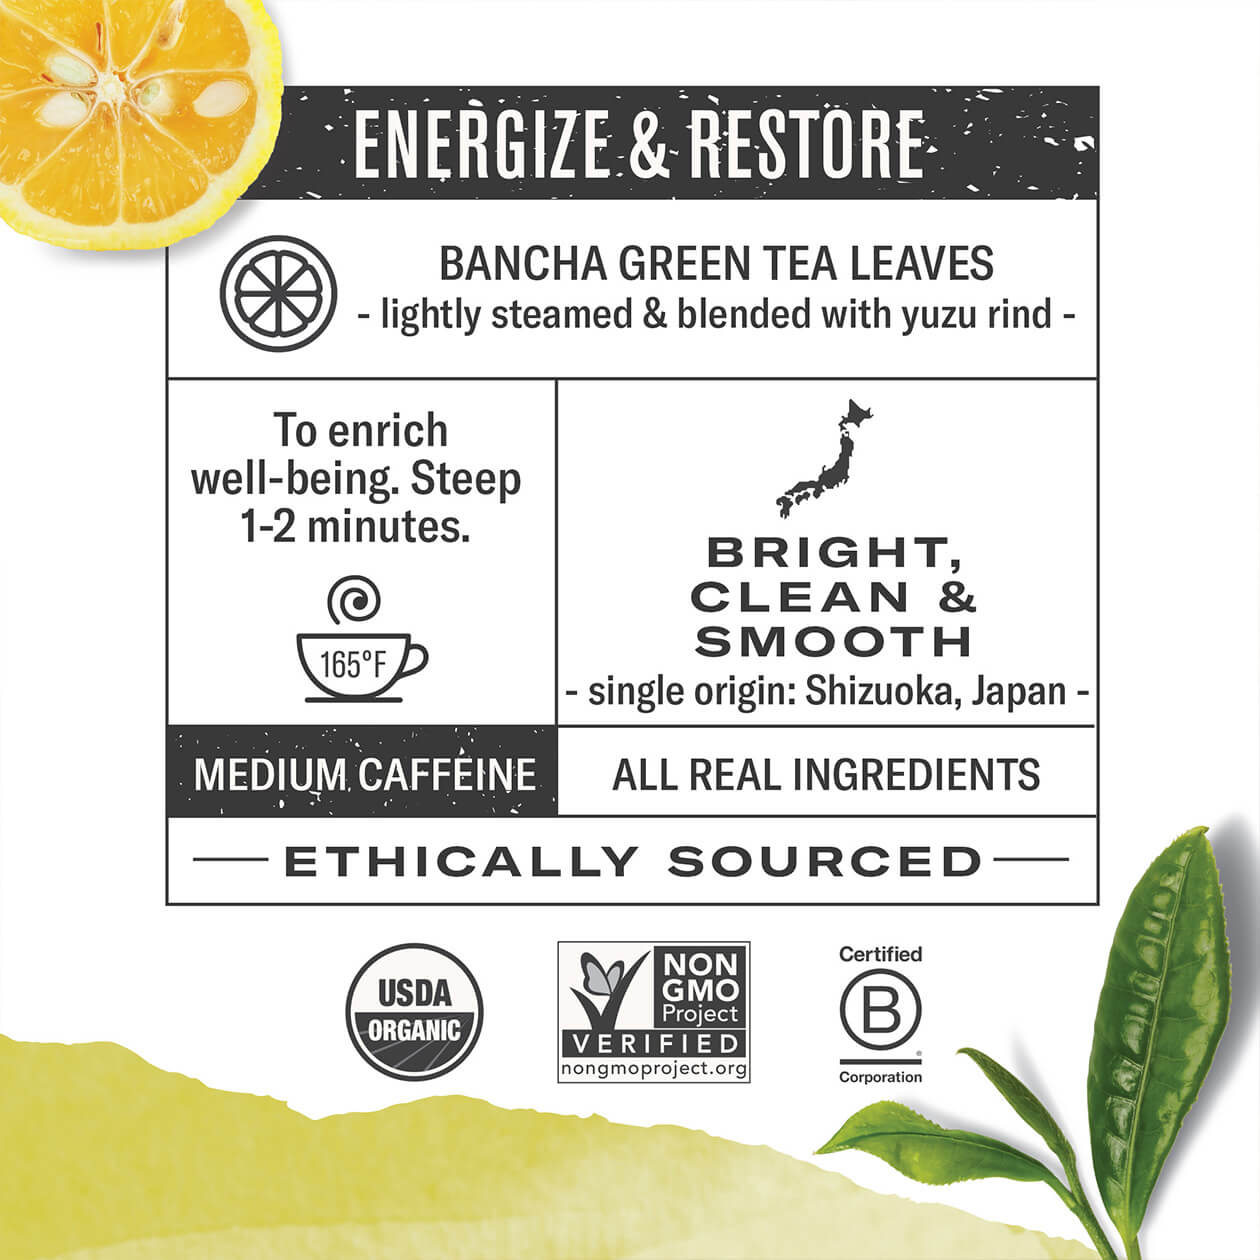 Infographic about Yuzu Bancha: steep 1-2 minutes, origin: Shizouka Japan, medium caffeine, all real ingredients, ethically sourced